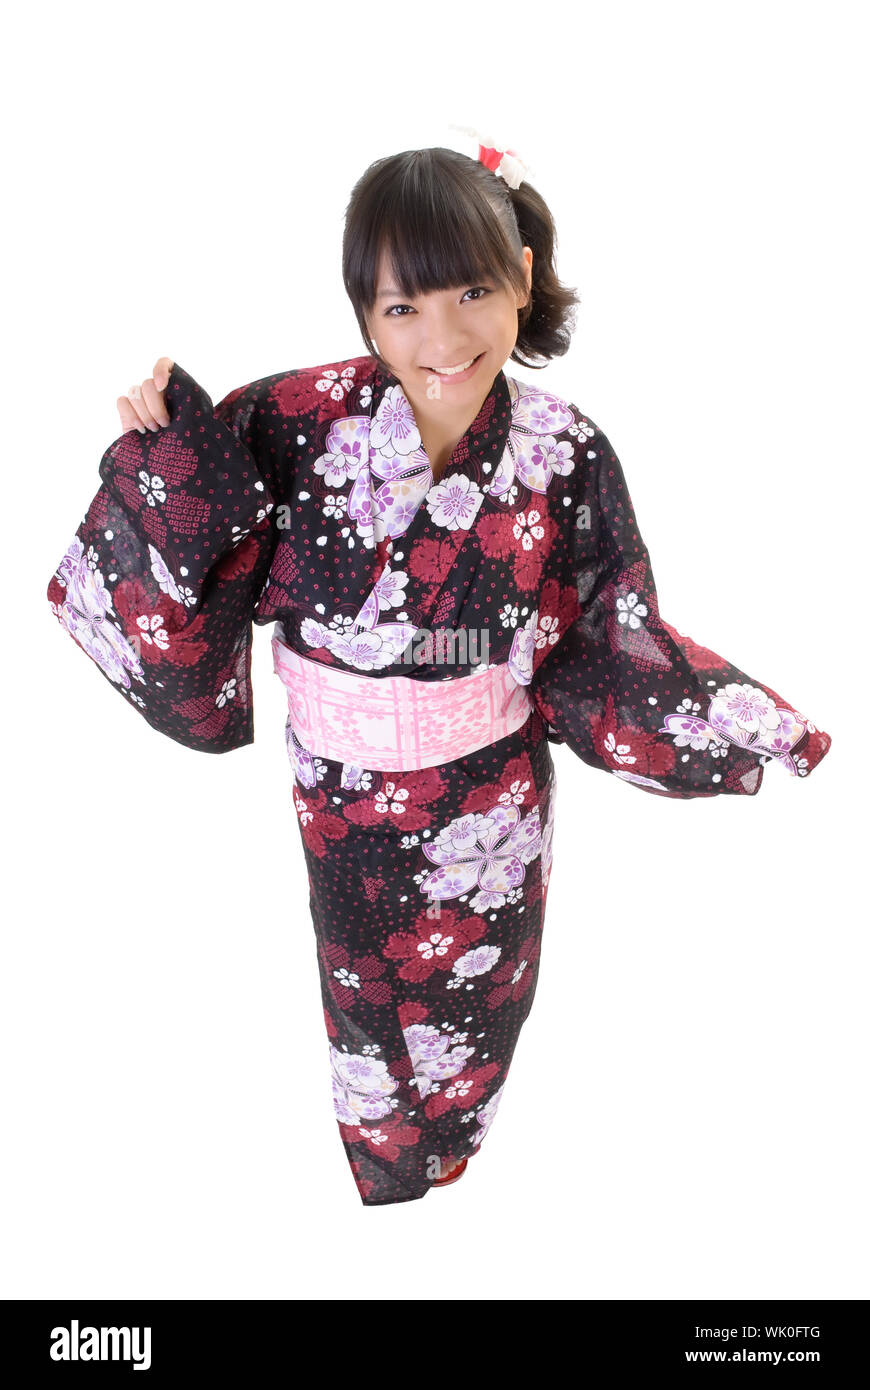 Cute japanese girl with traditional clothes smiling against white ...